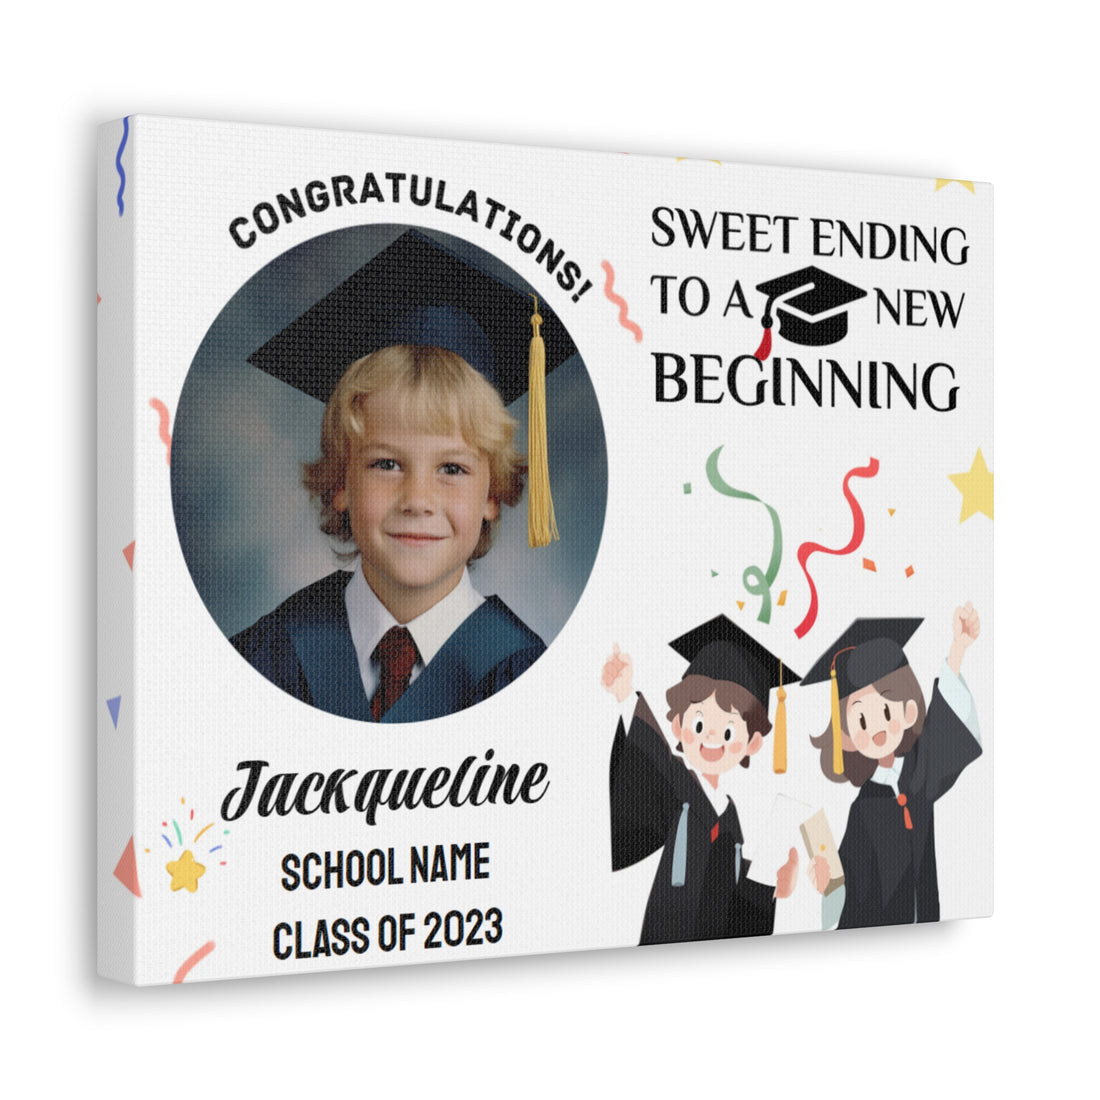 Sweet Ending to A New Beginning - Personalized Graduation Gifts